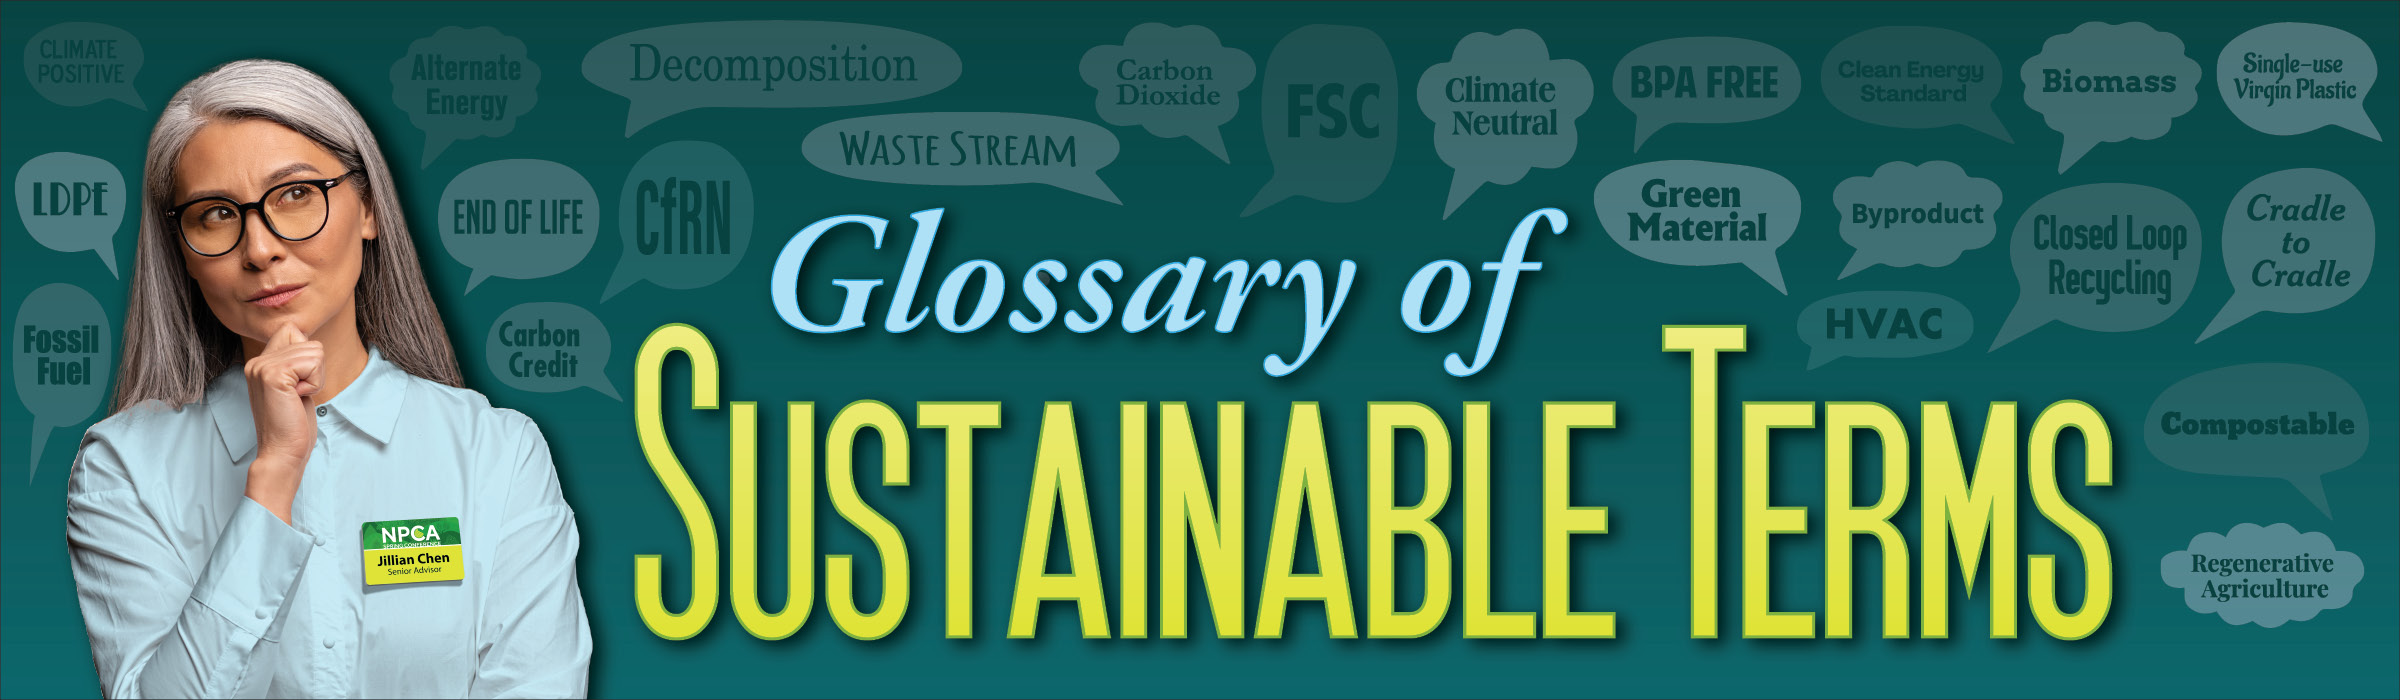 Glossary of Sustainable Terms_Blog